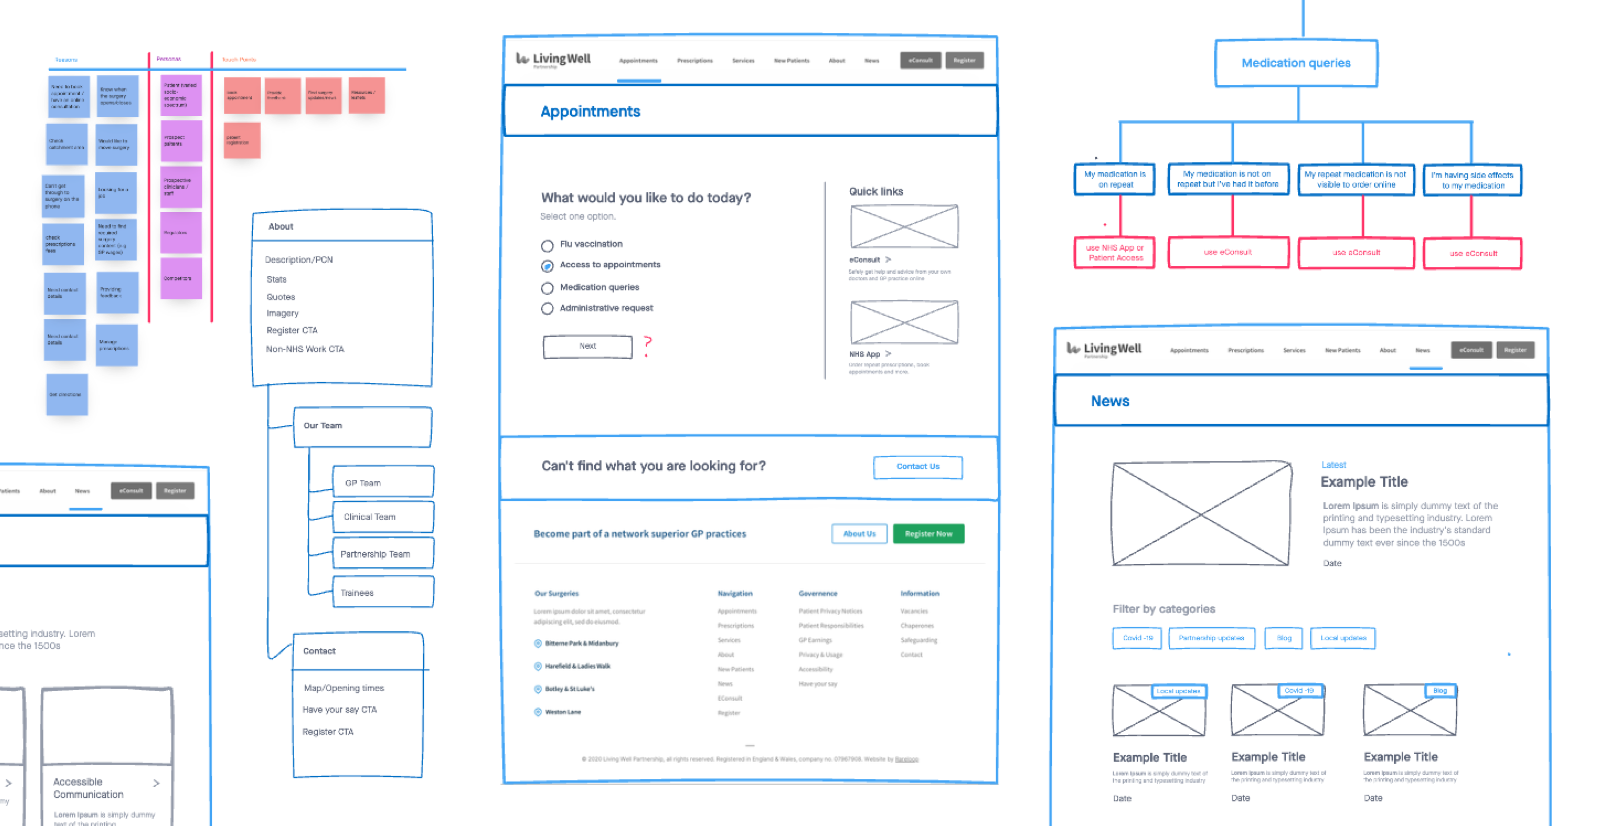 Discovery phase visual including sitemap, wireframes, key website elements.